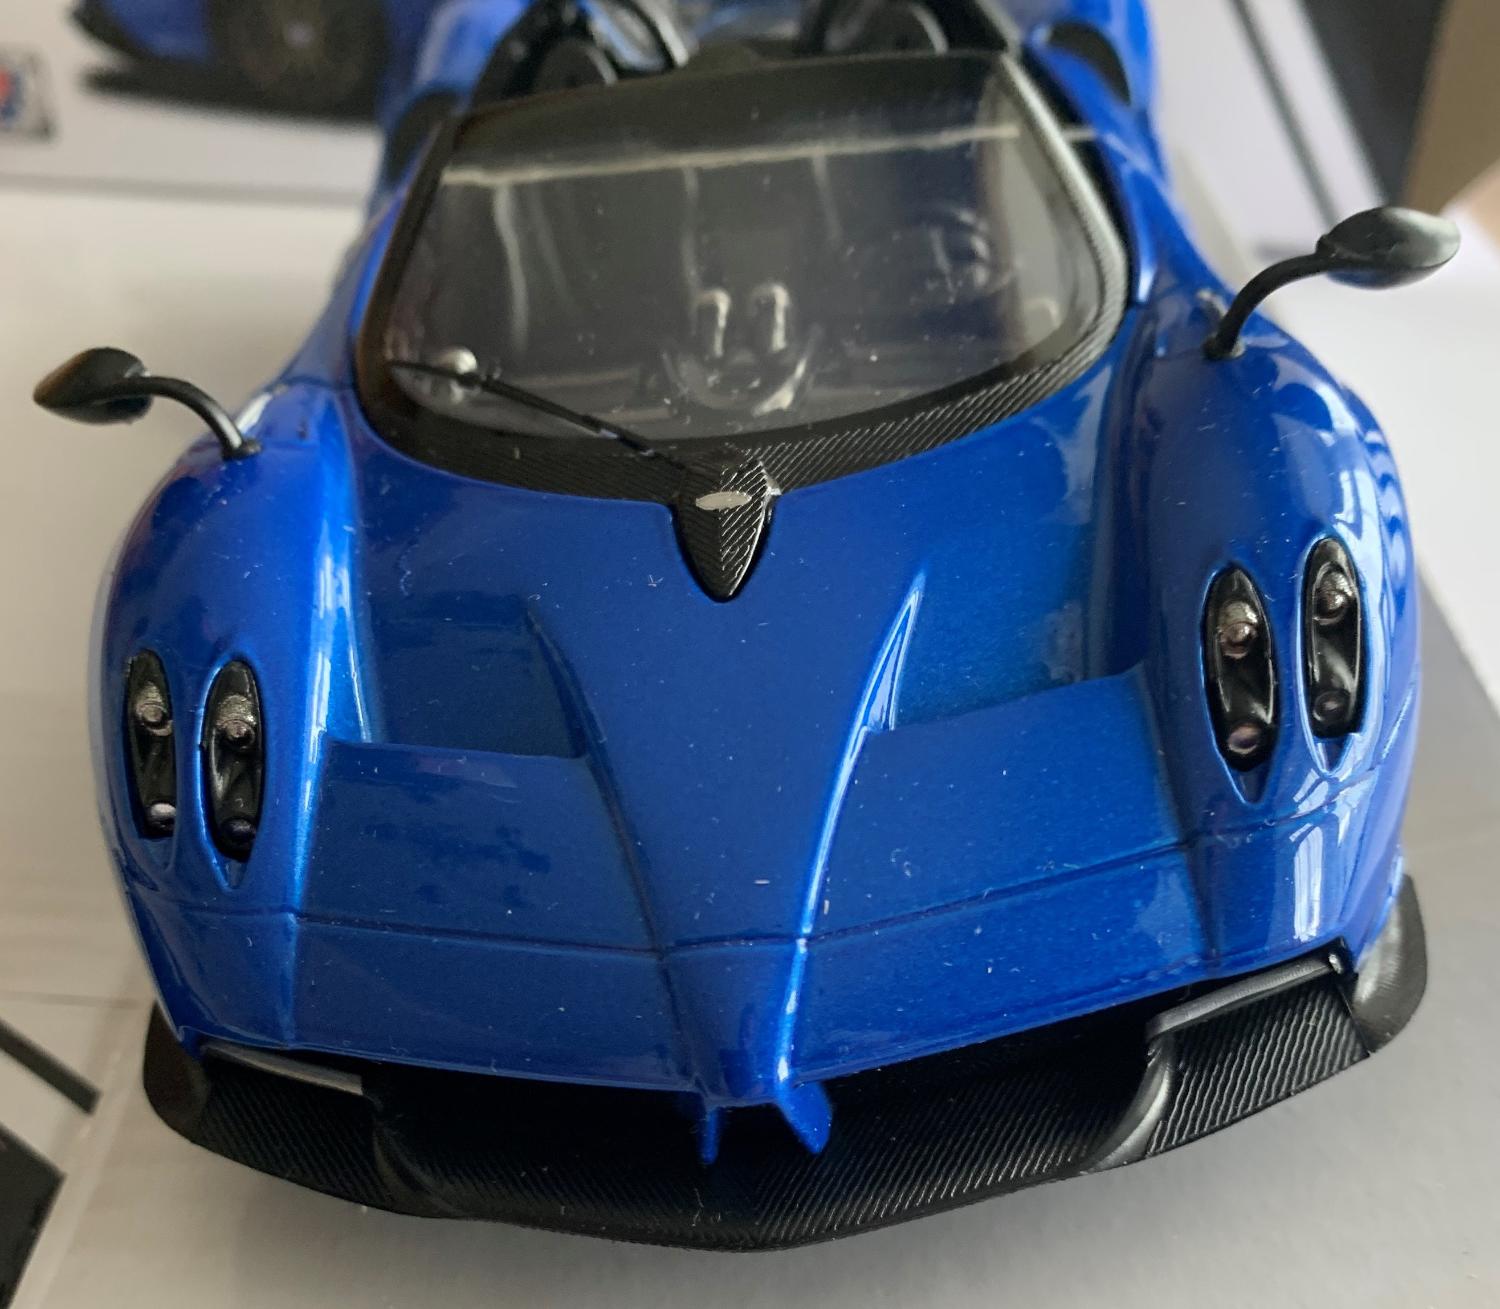 Pagani Huayra Roadster in blue 1:24 scale model from Motormax